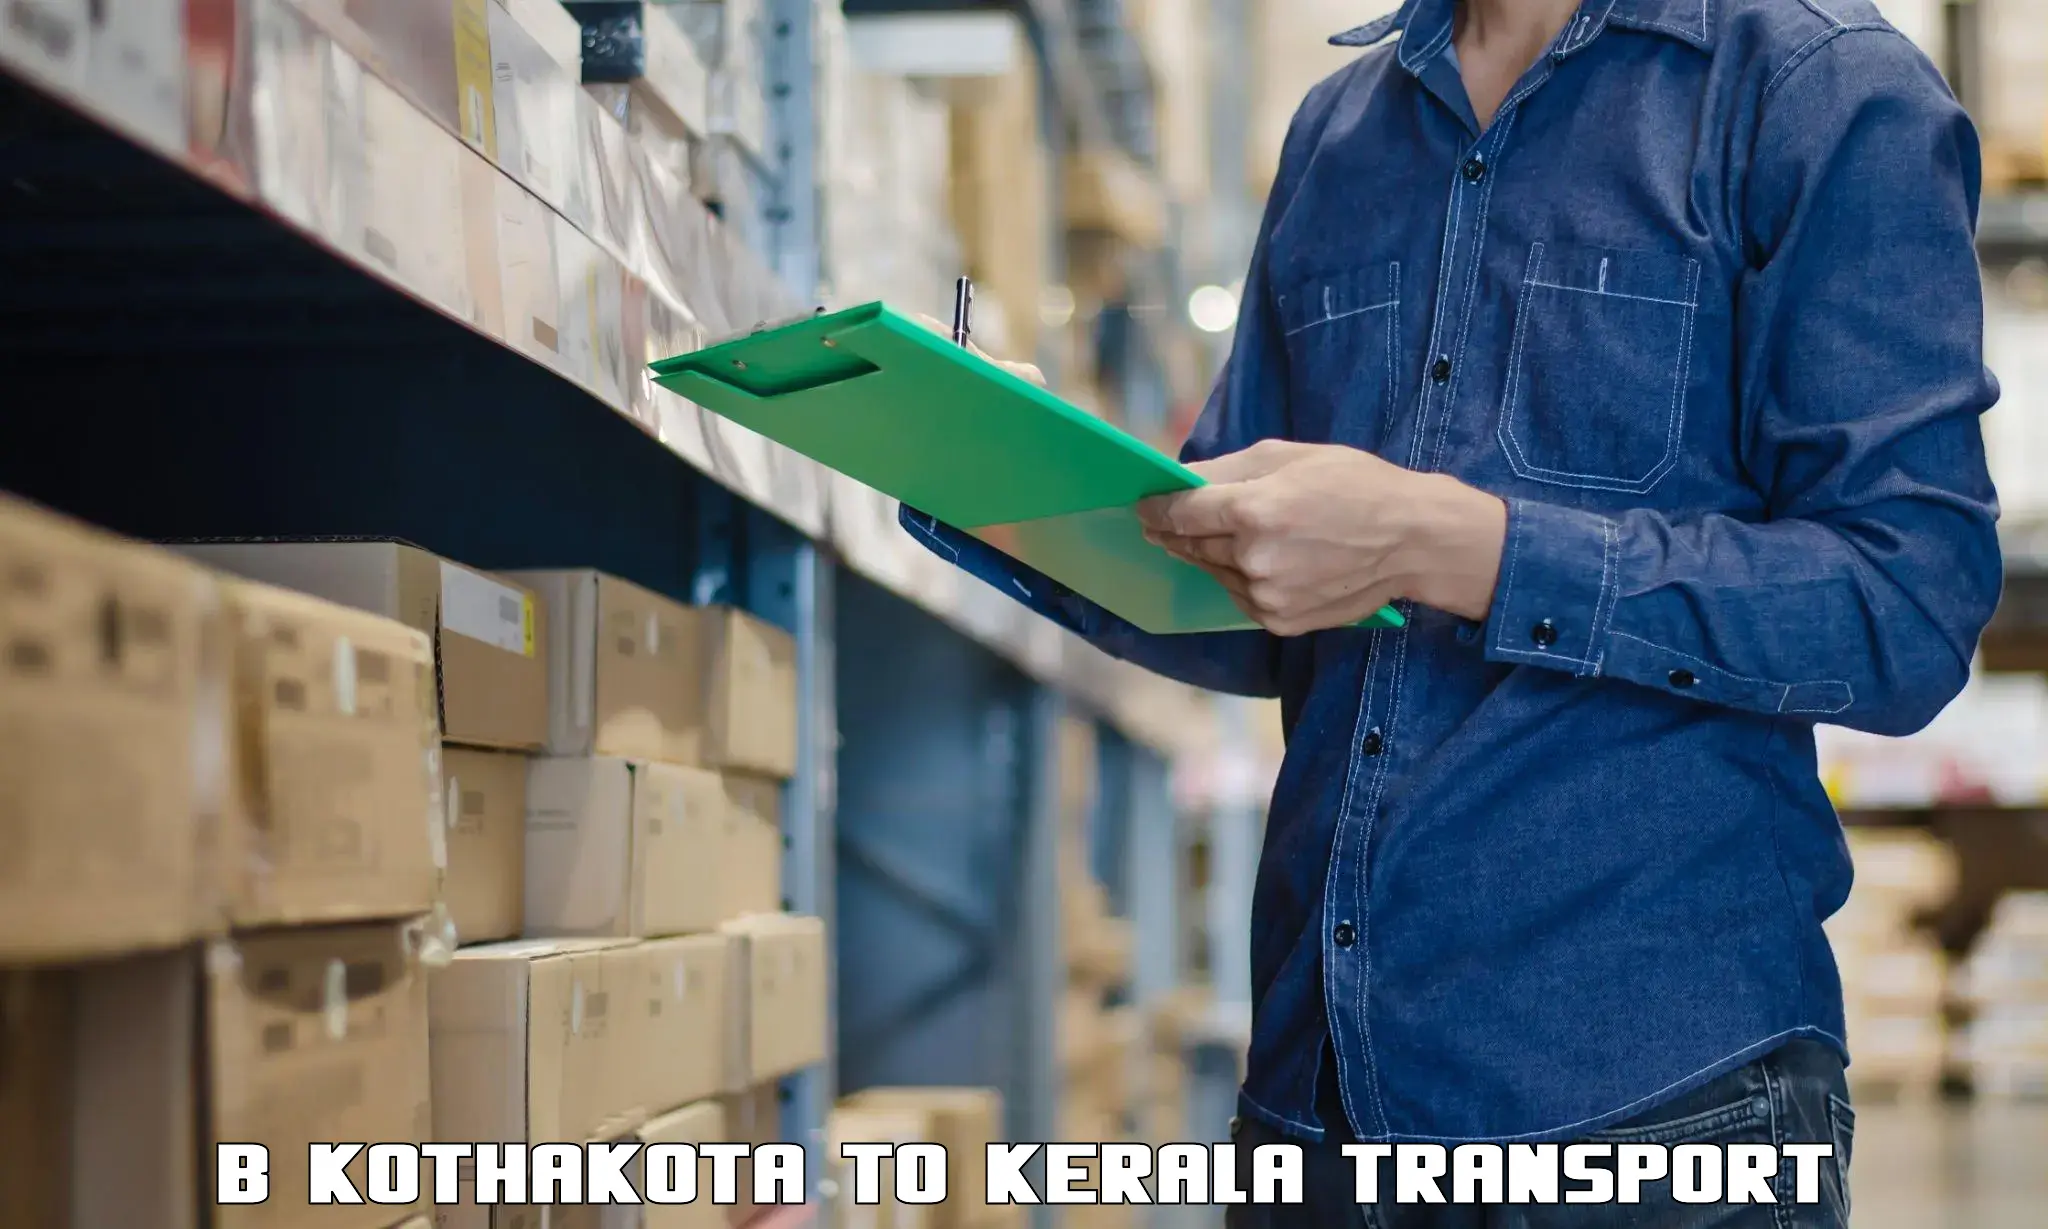 Package delivery services B Kothakota to Kannur